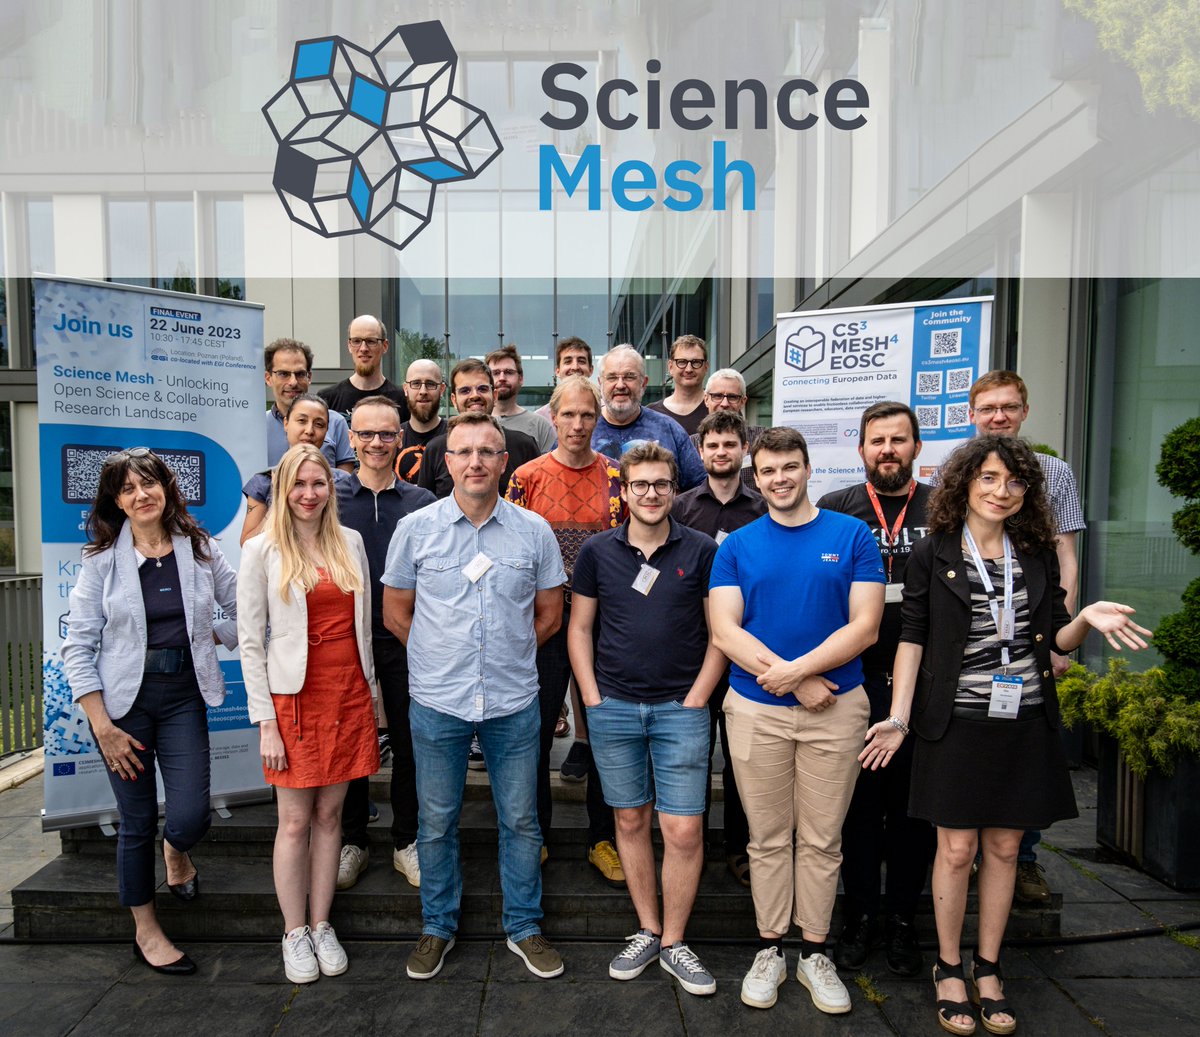 We are Mesh, #ScienceMesh😎🙌The team which developed this to promote #scientificcollaboration through a federated cloud connecting heterogeneous sites with data, applications & computation, invites you to join the mesh & be part of 🇪🇺 #openscience. Follow cs3mesh4eosc.eu